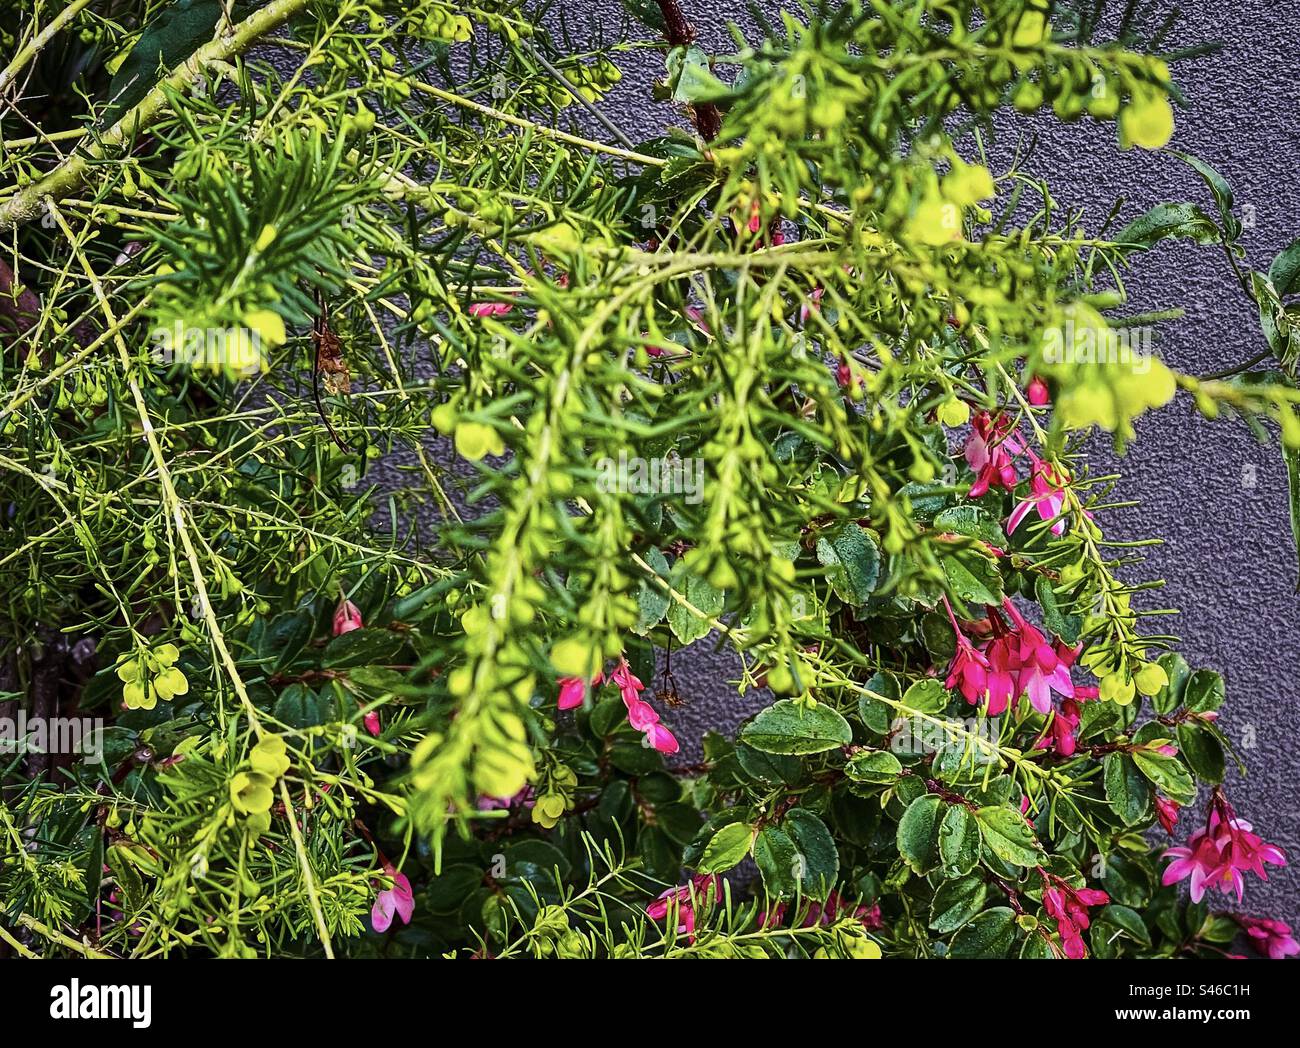 Close-up of pink flowers of fuchsia begonia or begonia fuchsioides together with yellow flowering boronia megastigma lutea or yellow boronia, an Australian native shrub growing against wall. Stock Photo